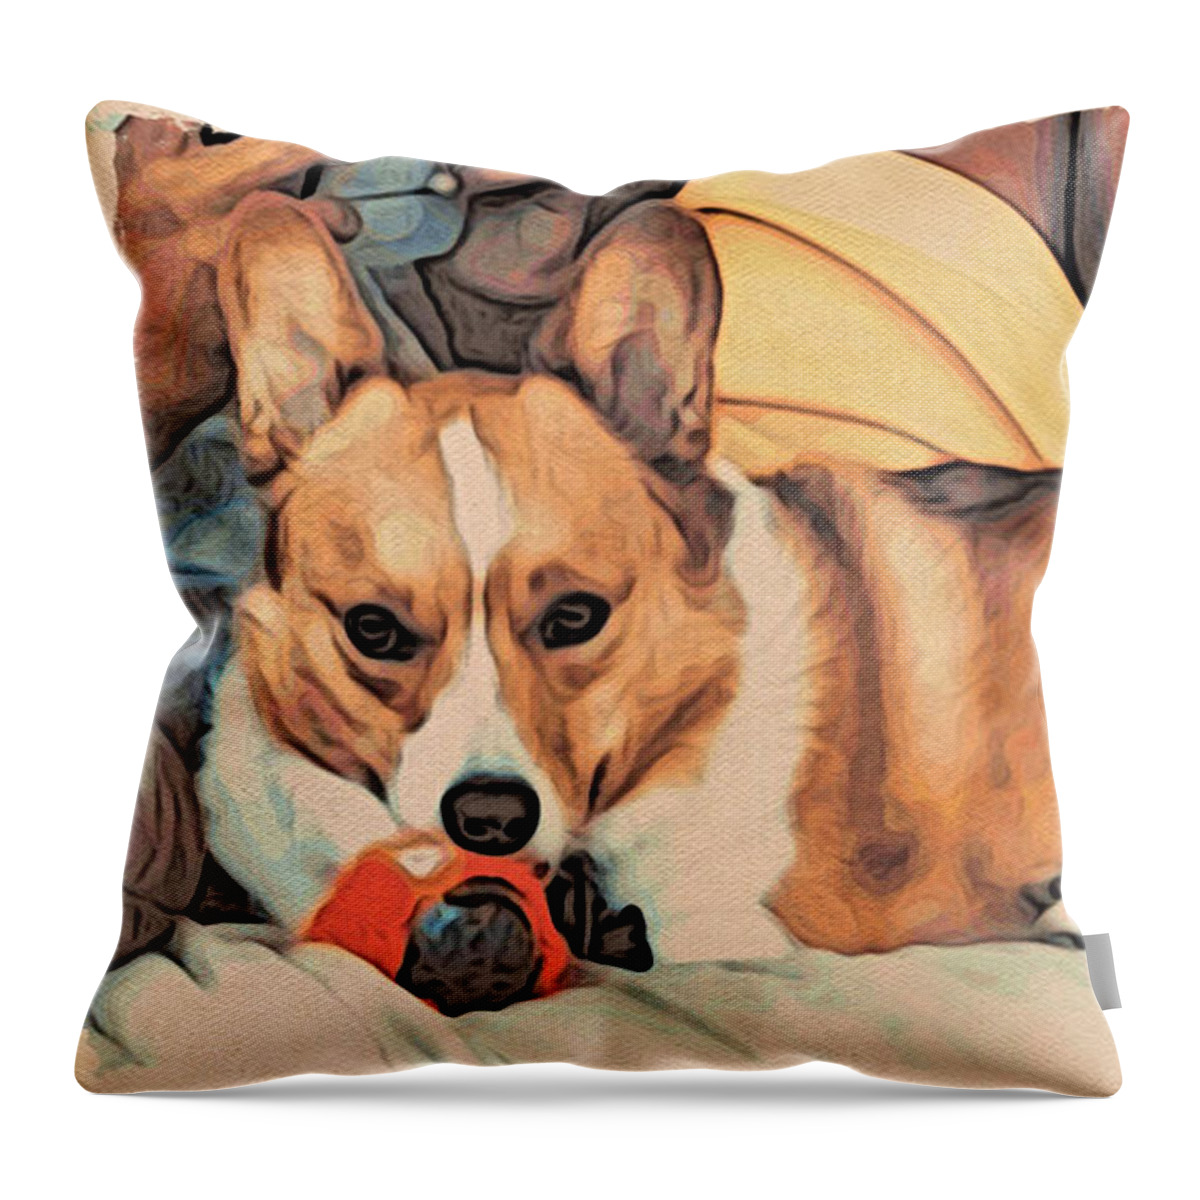 Pembroke Welsh Corgi Throw Pillow featuring the digital art Couch Corgi Chewing a Ball by Kathy Kelly